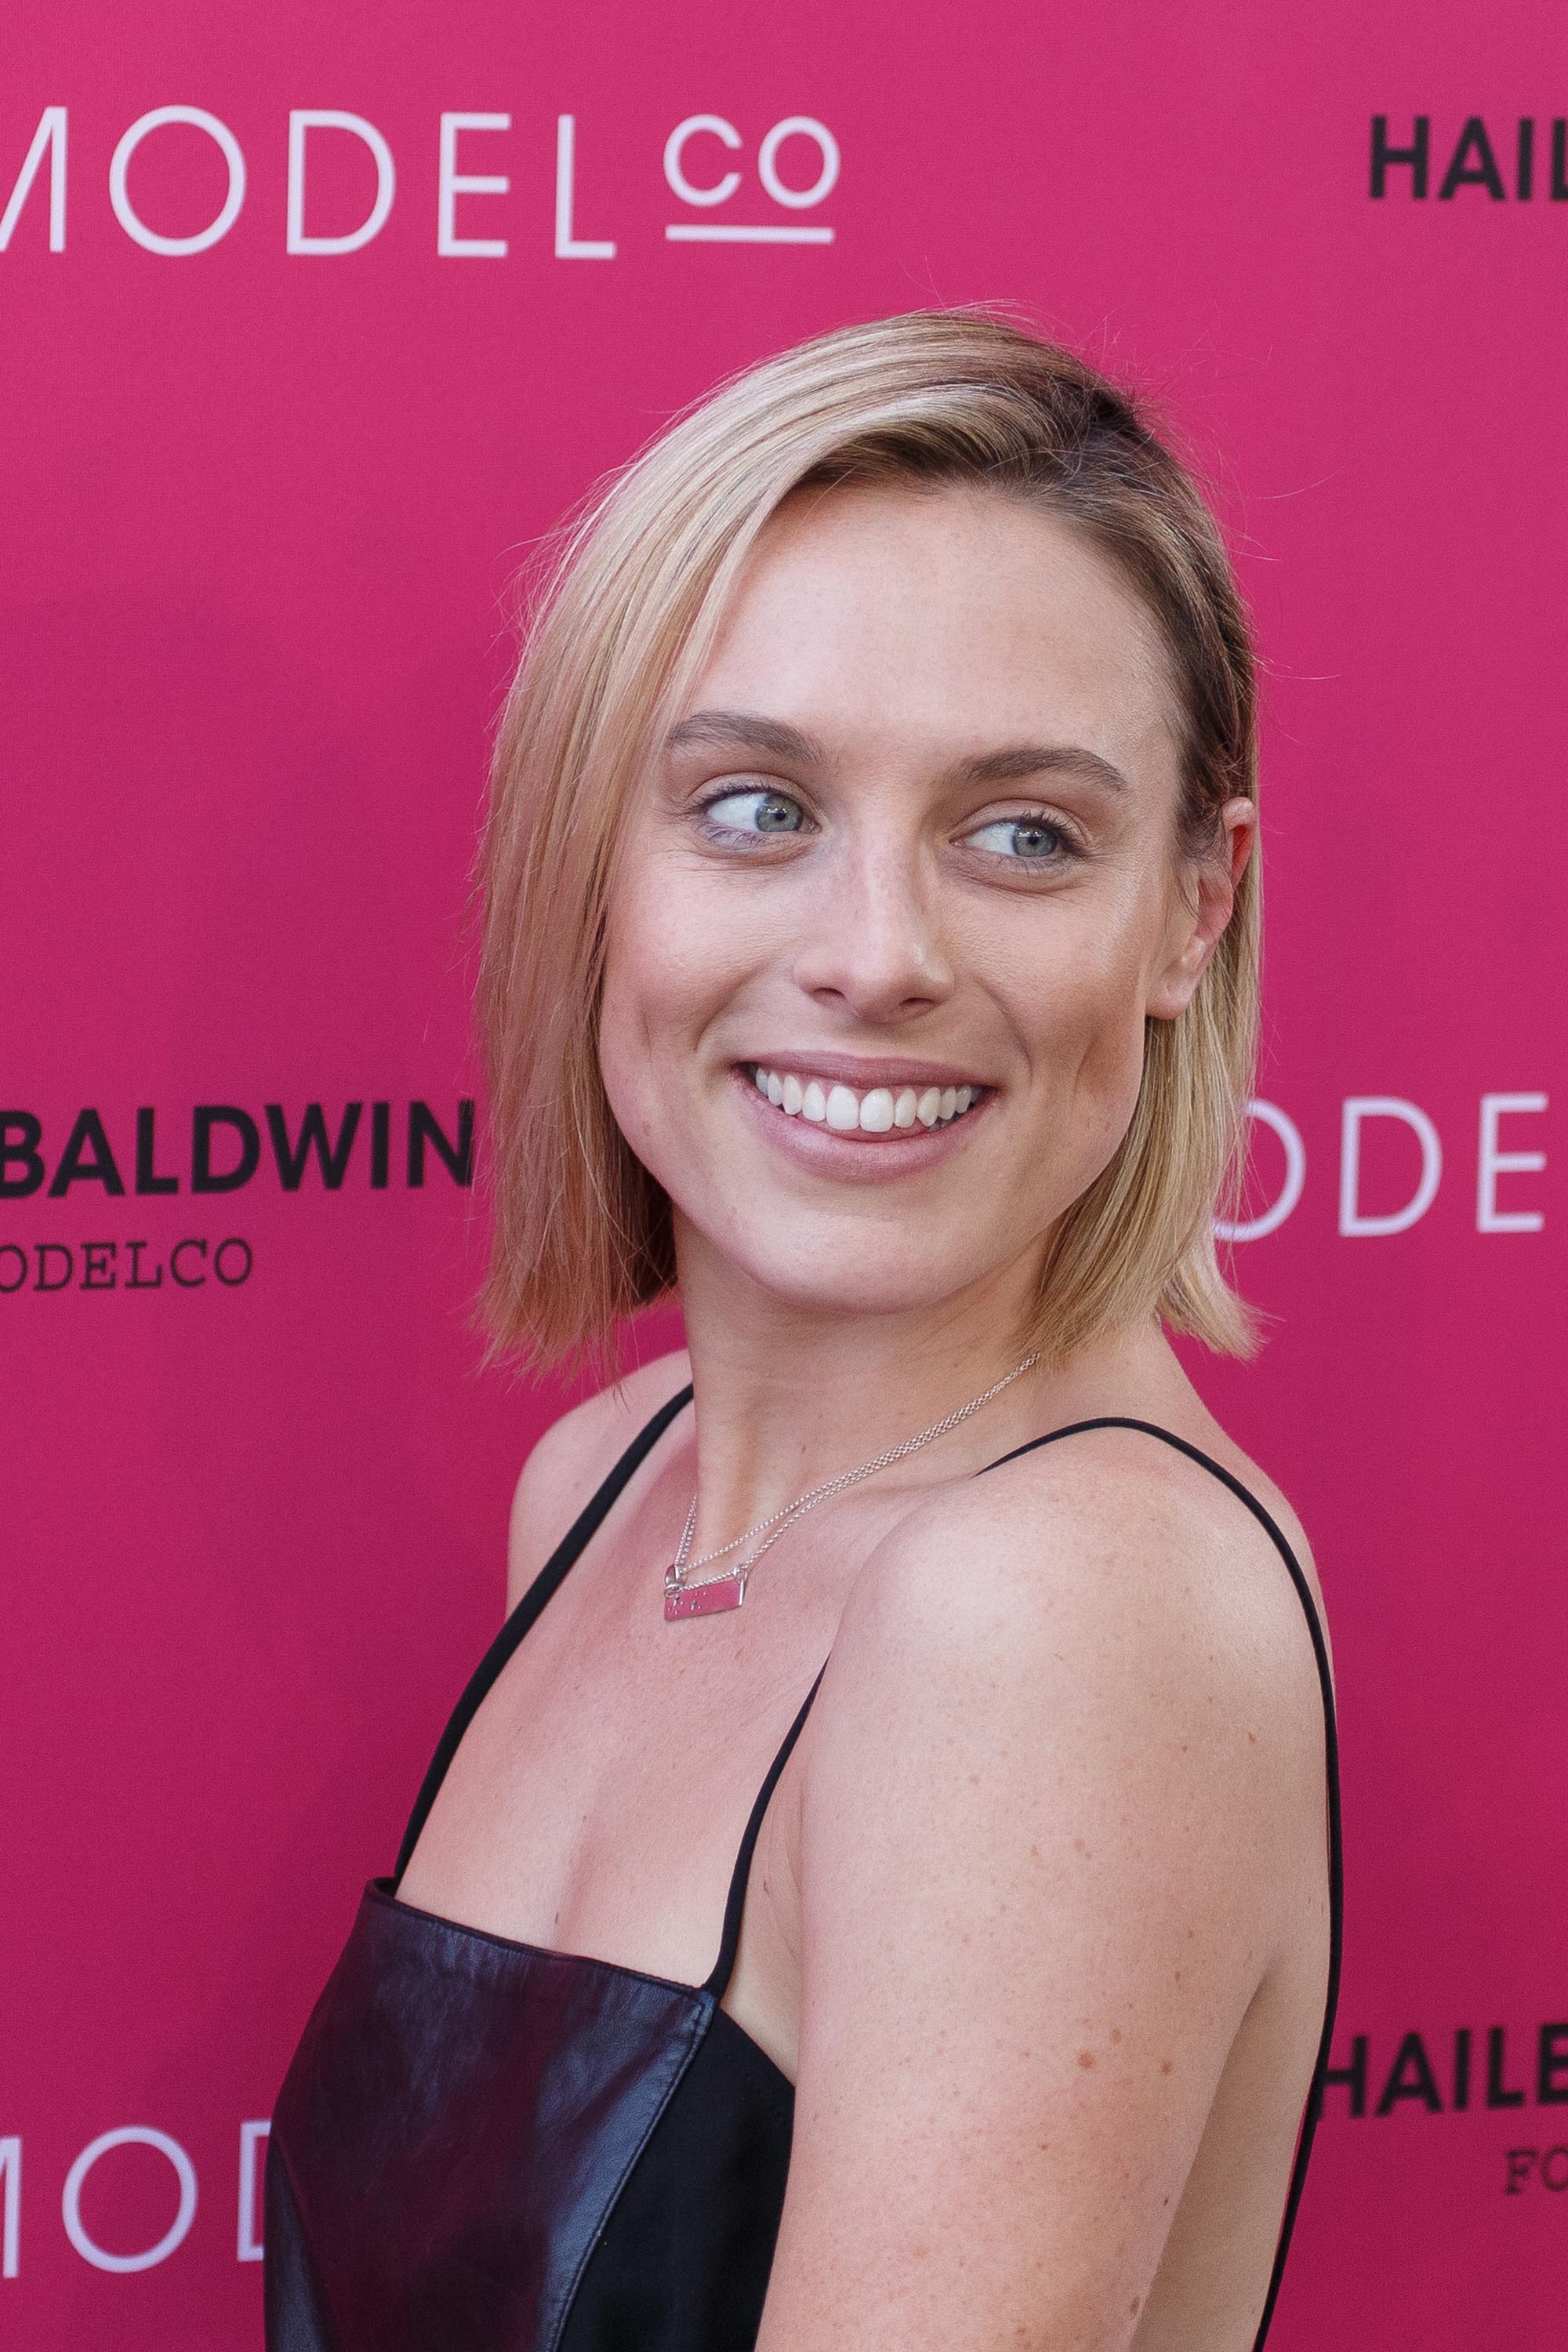 Casey Burgess attends VIP launch of the Hailey Baldwin